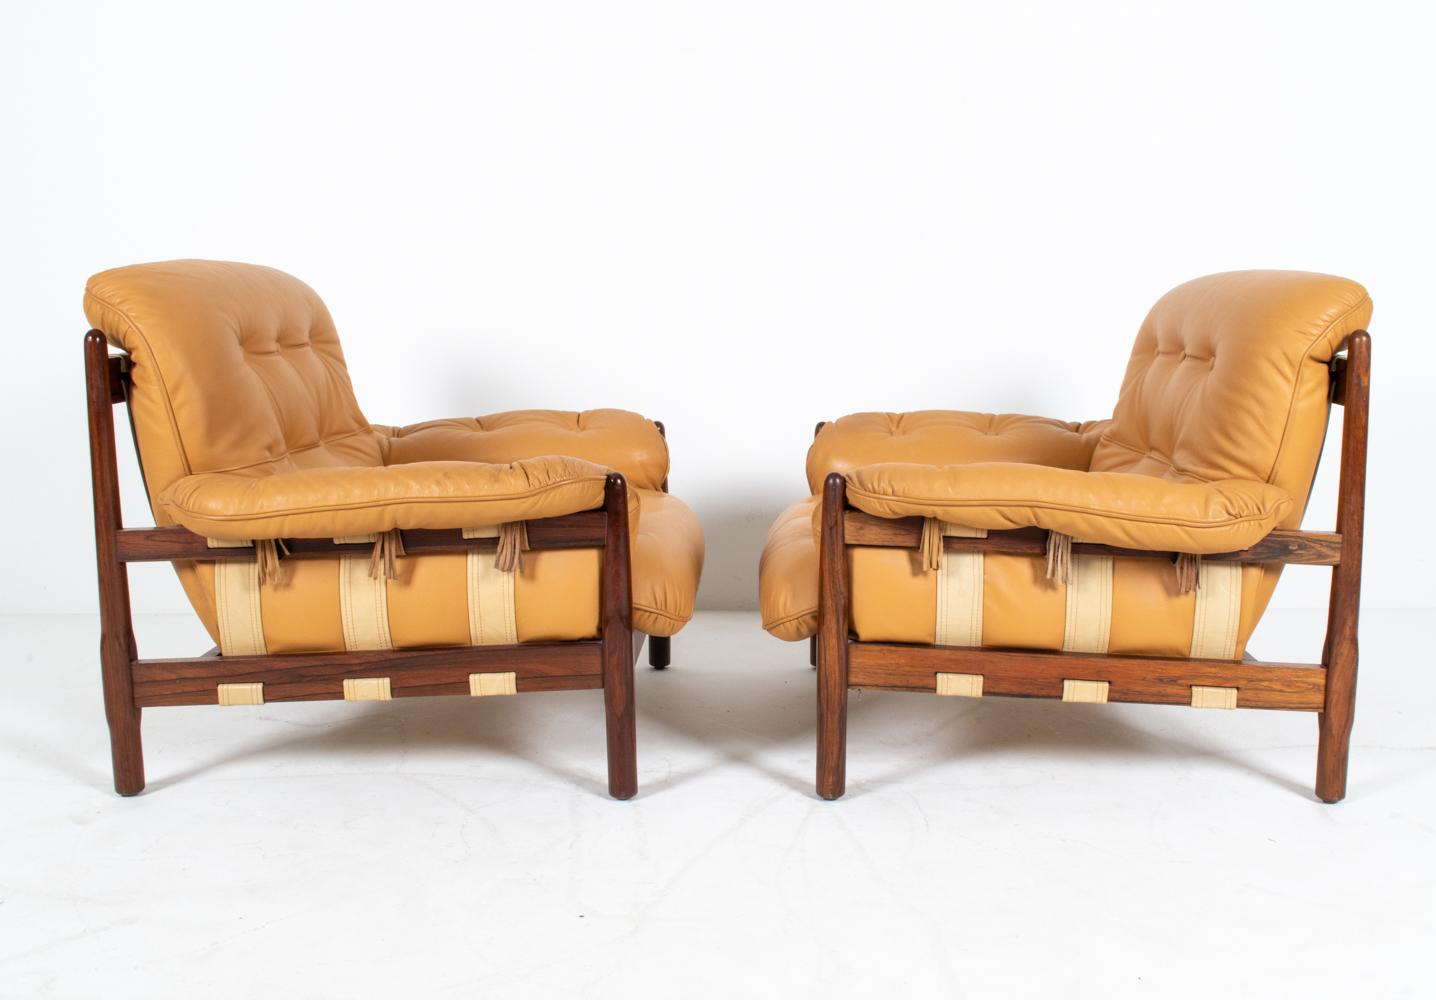 Pair of Brazilian Modernist Rosewood & Leather Easy Chairs, circa 1970s For Sale 9